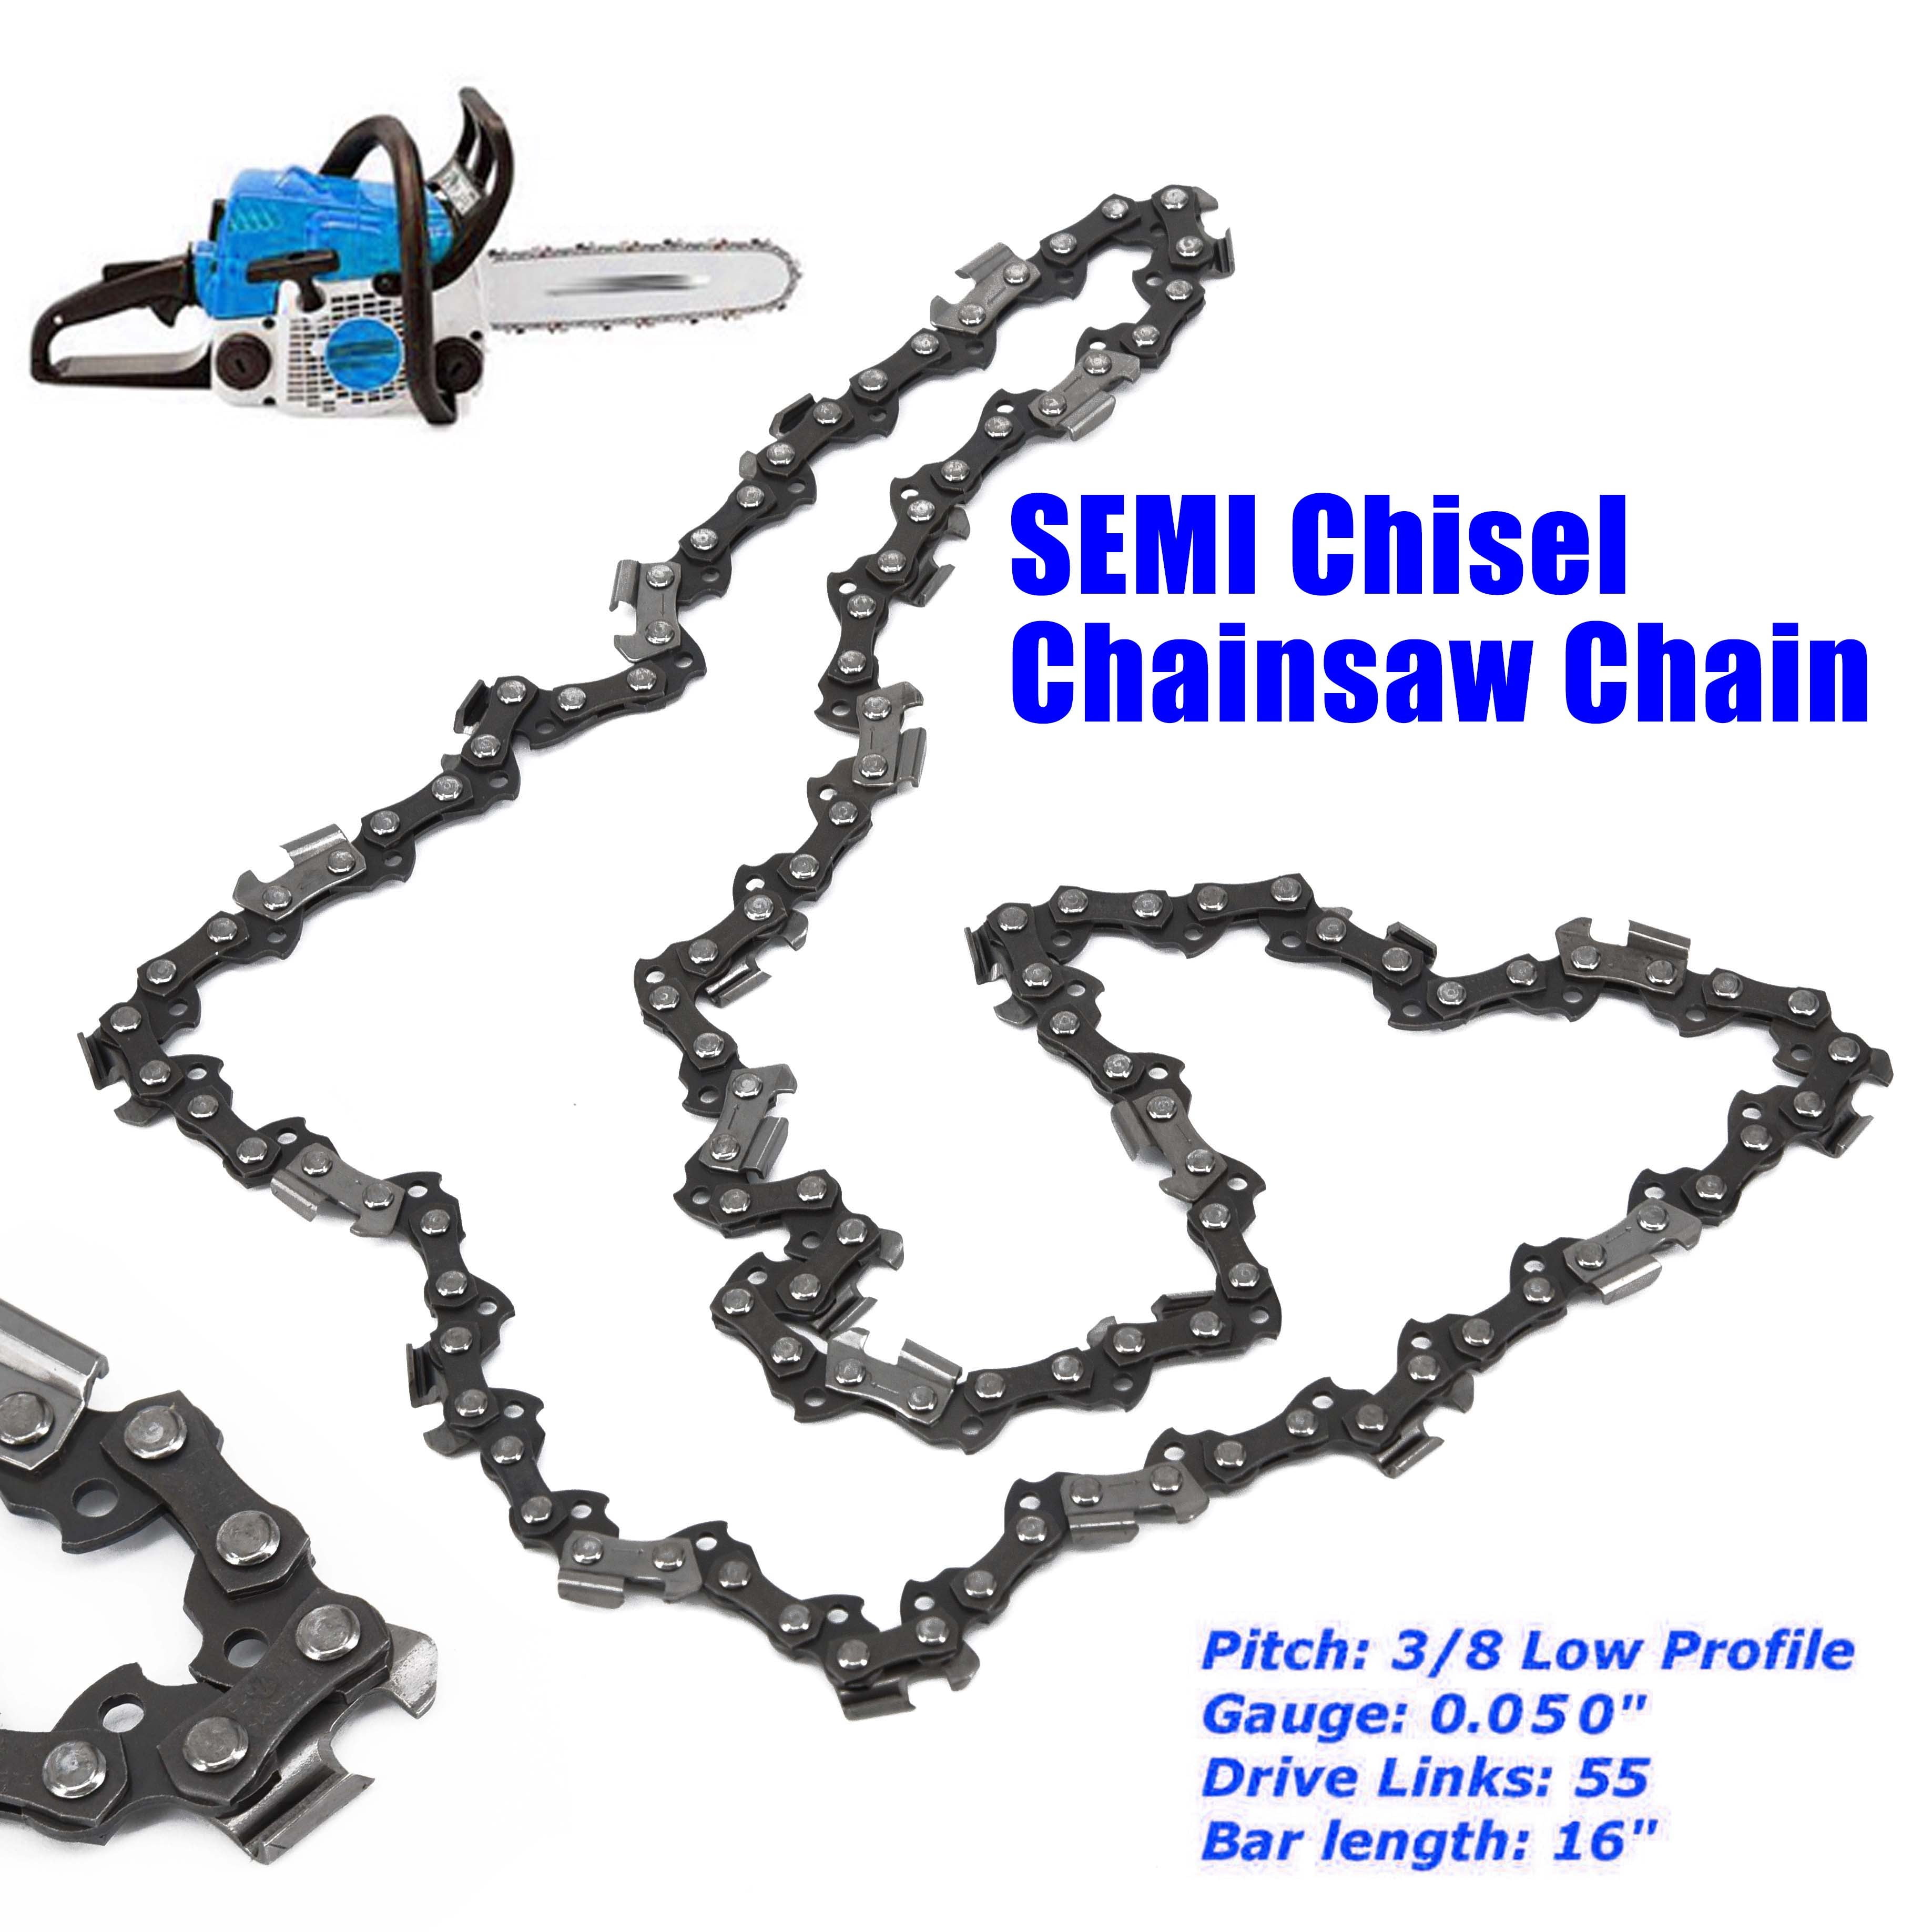 STIHL 3/8 Pitch PS RACING CHAIN 24 inch Cannon 84 drivers full chisel .050 gauge 